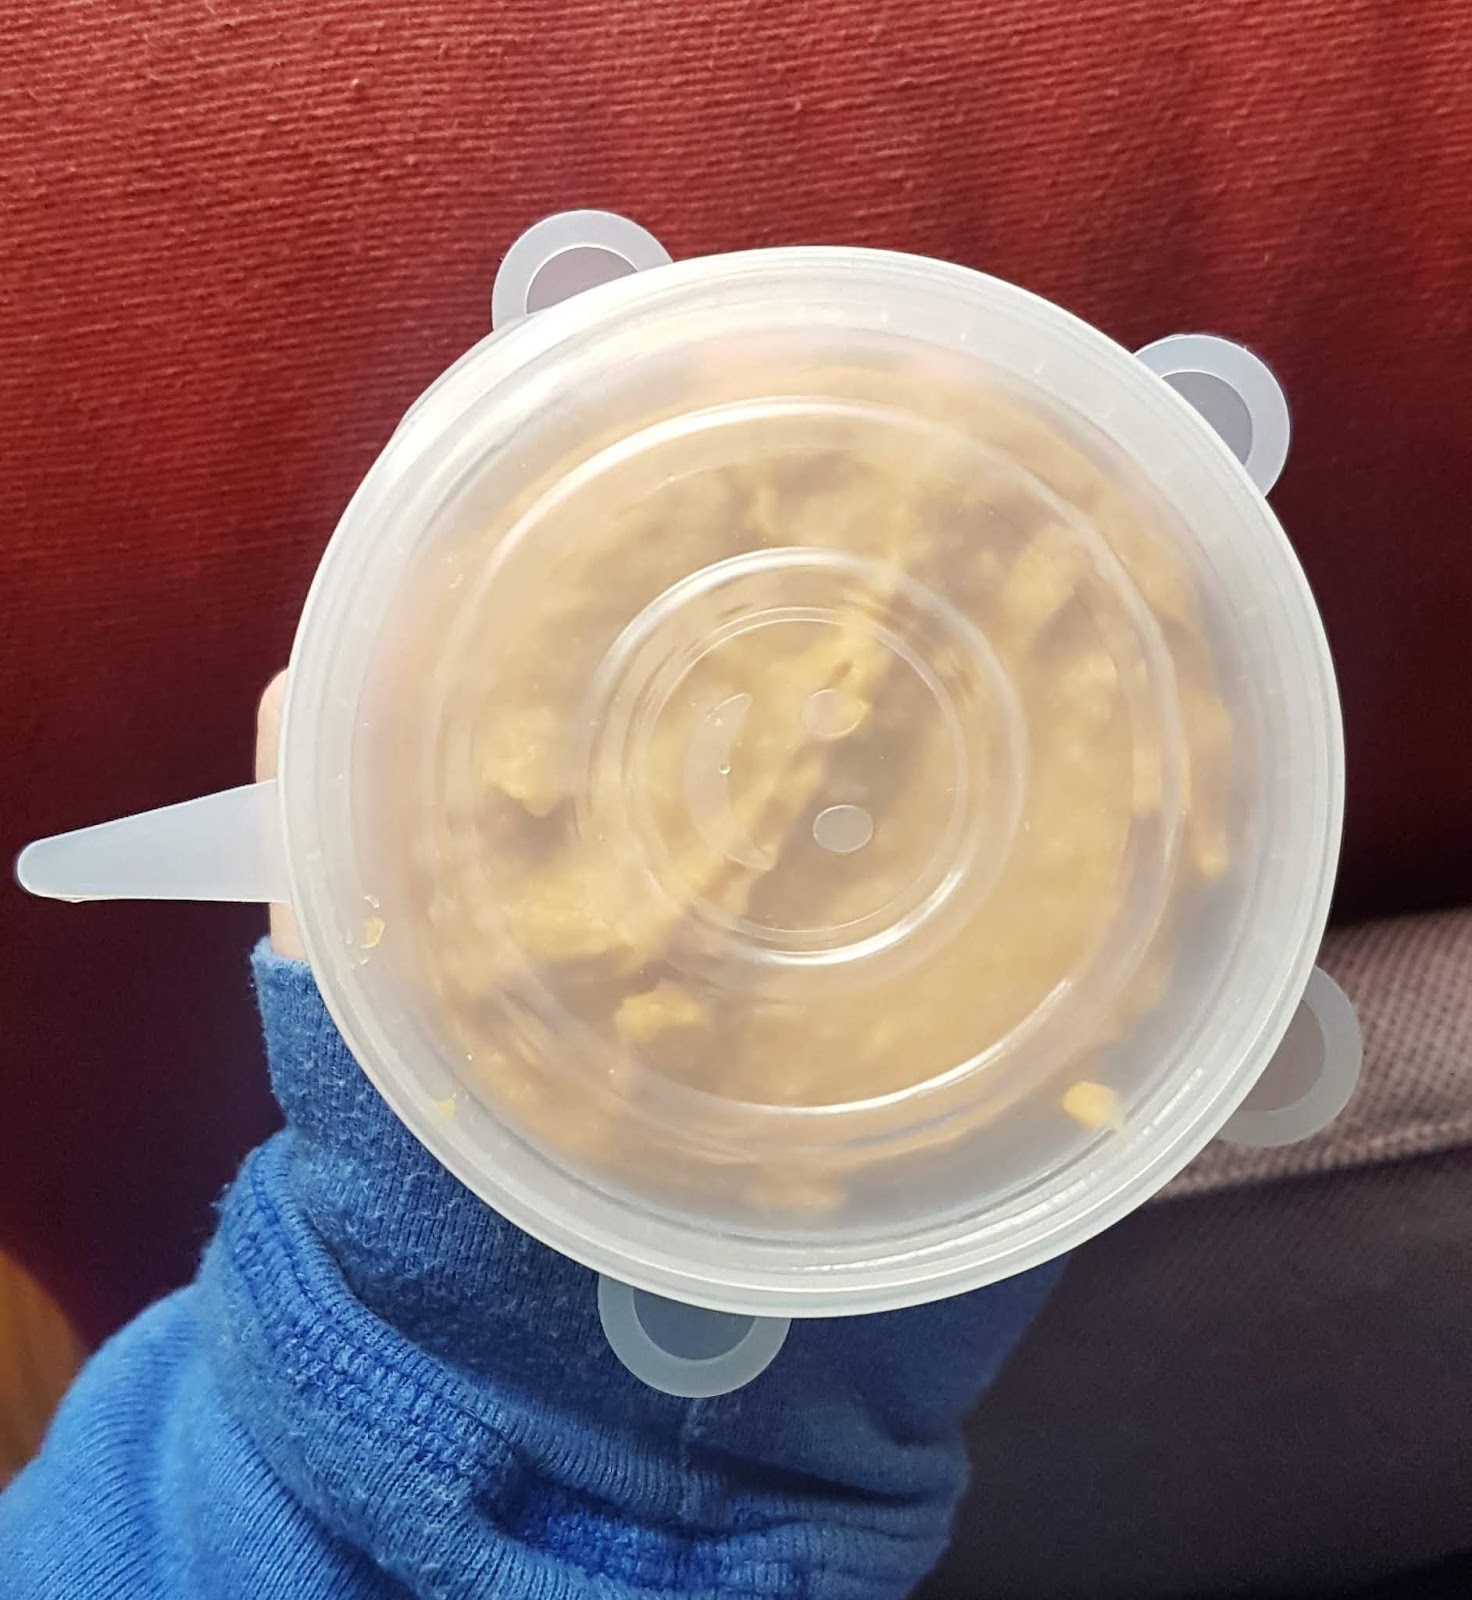 Net Zero Co Review - Zero Waste Reusable Stretch and Seal Silicone Lids